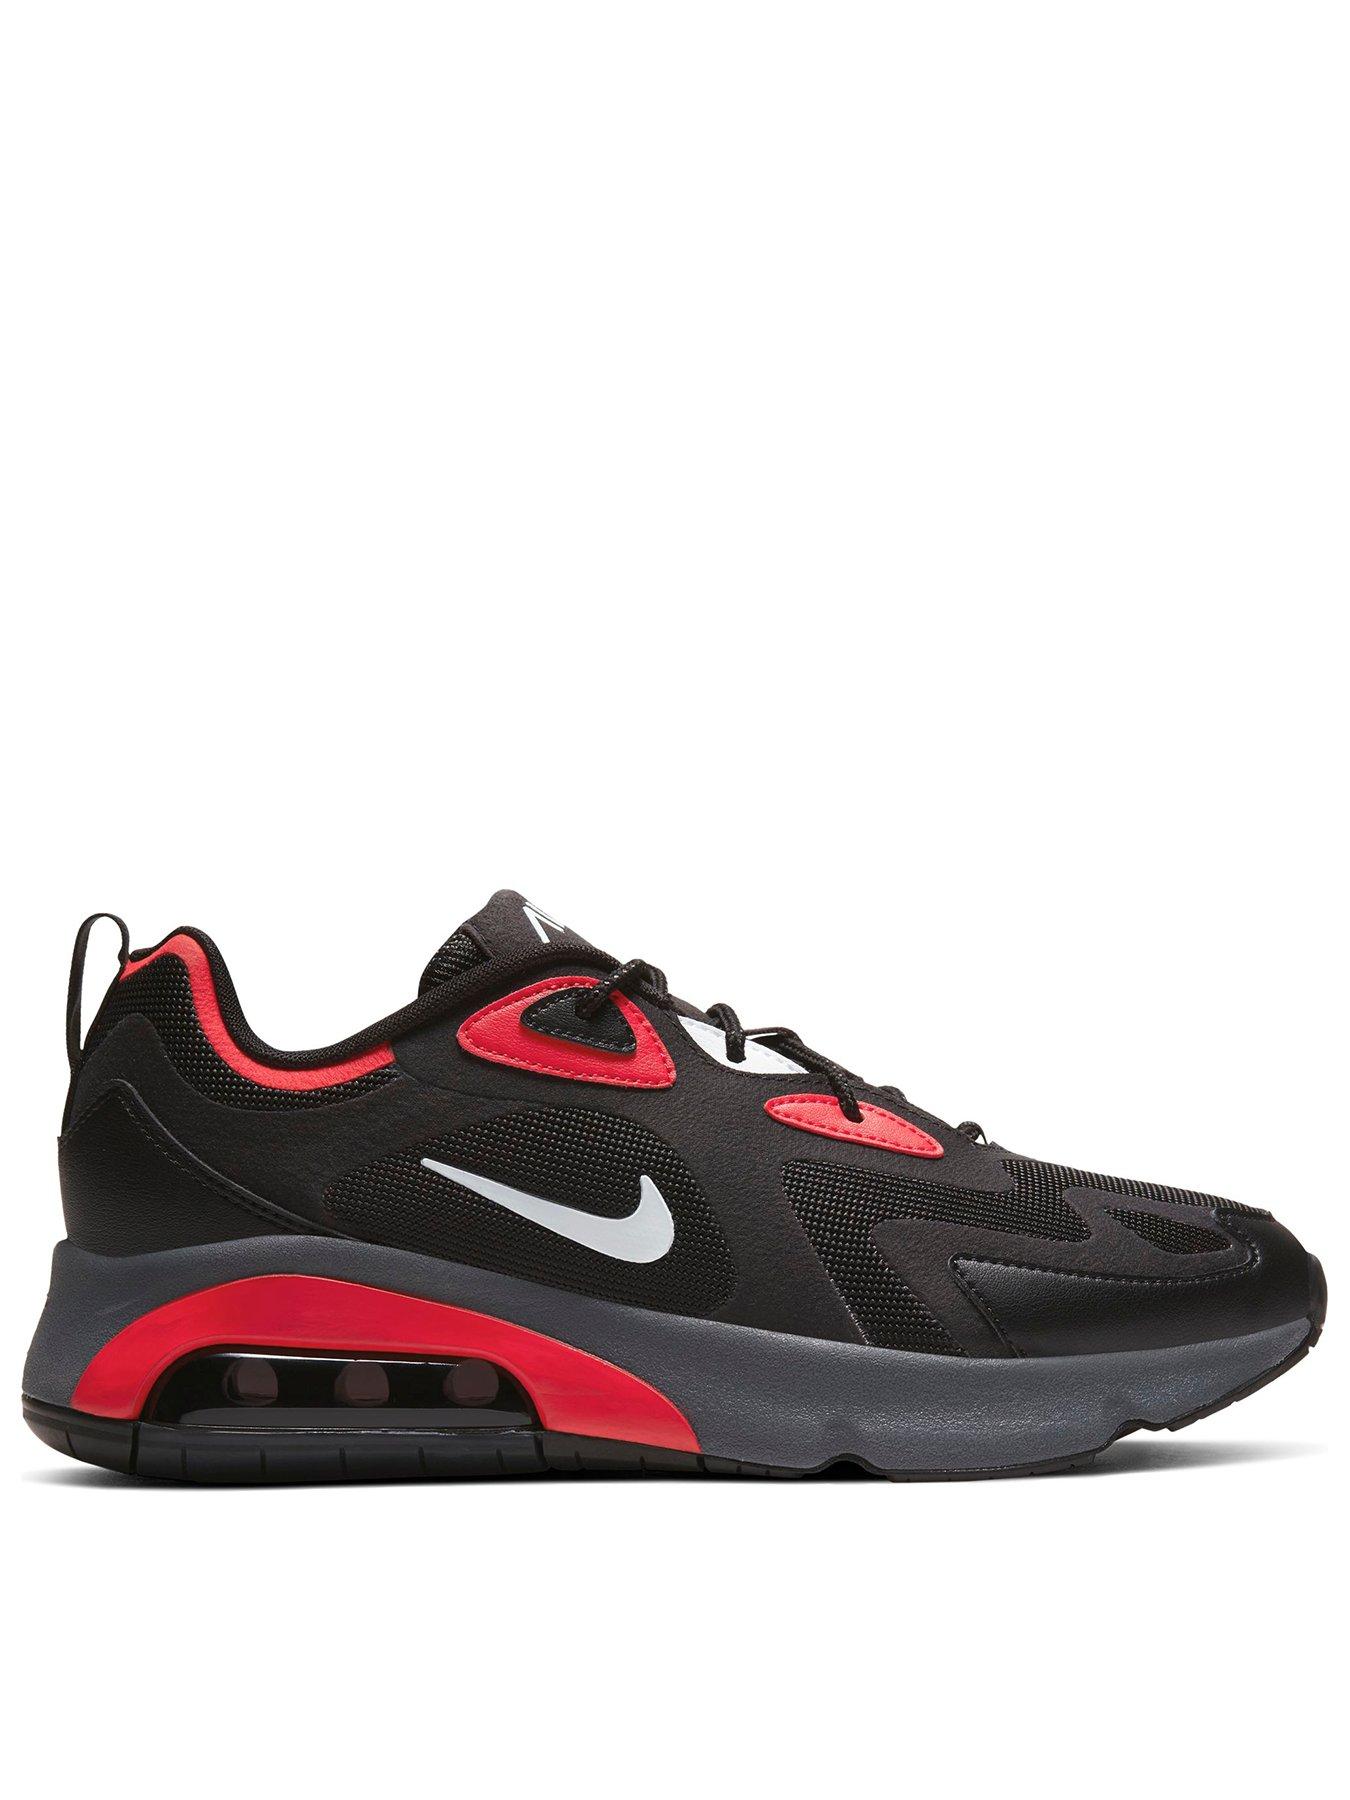 air max 200 red and black